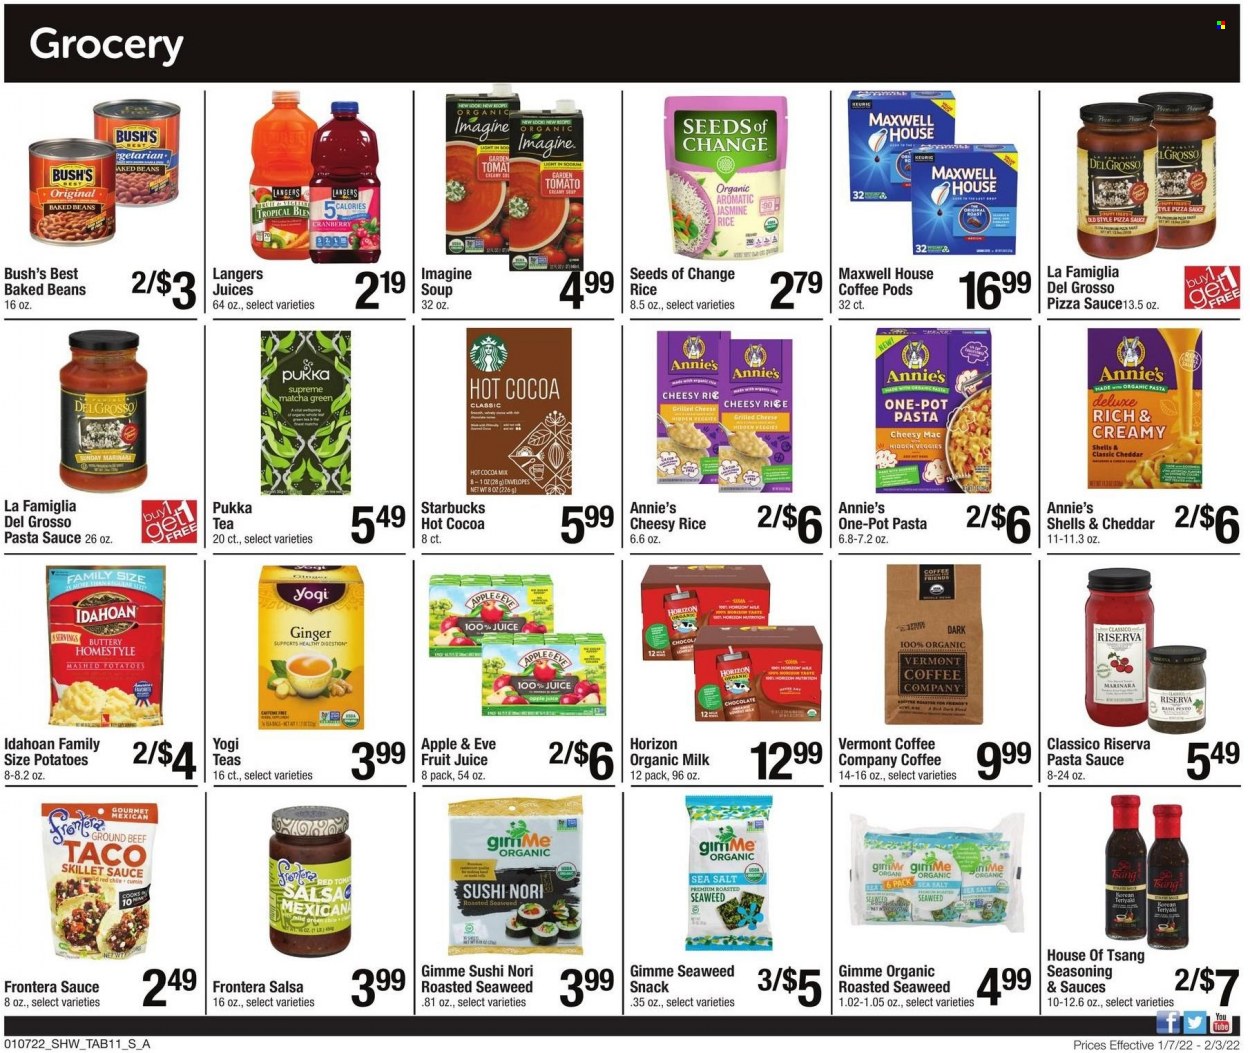 thumbnail - Shaw’s Flyer - 01/07/2022 - 02/03/2022 - Sales products - ginger, mashed potatoes, pasta sauce, soup, Annie's, organic milk, snack, seaweed, sea salt, baked beans, rice, spice, cumin, pesto, salsa, Classico, basil pesto, juice, fruit juice, hot cocoa, matcha, Maxwell House, tea, coffee pods, Starbucks, Keurig, beef meat, ground beef, pot, envelope. Page 11.